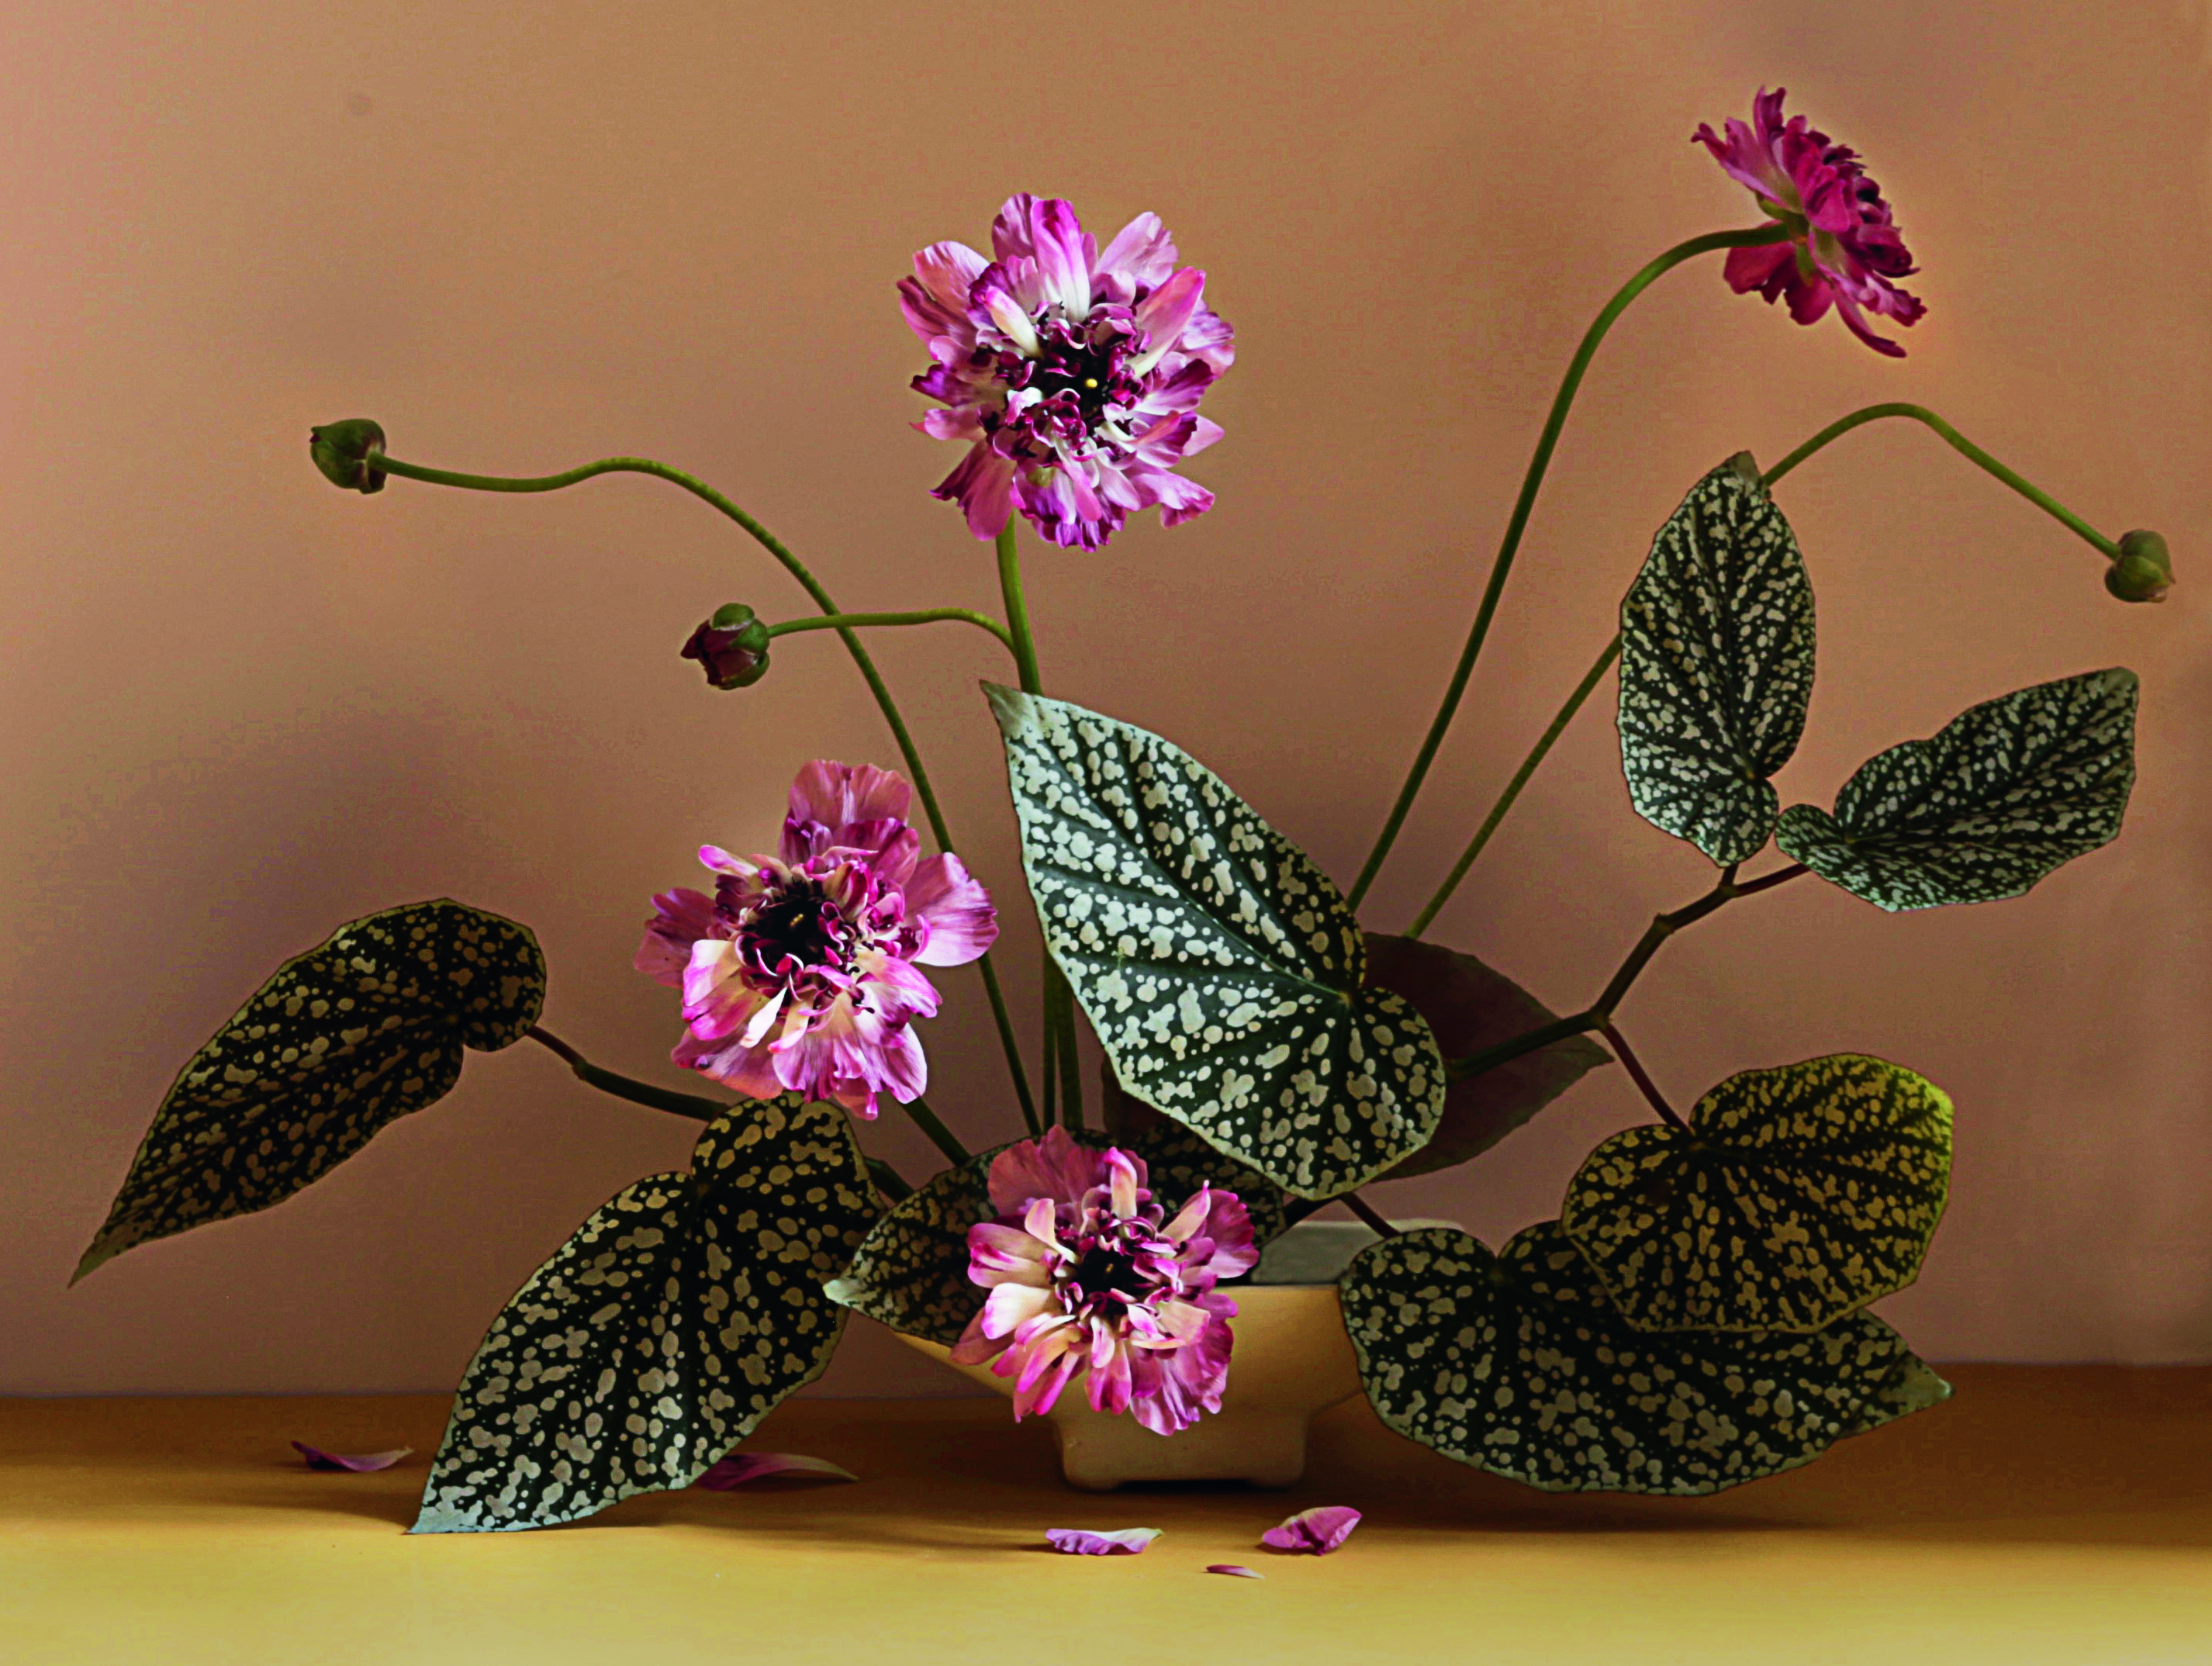 Ariel Dearie Flowers (Ariel Dearie, New York): Persian buttercup and begonia leaf. Picture